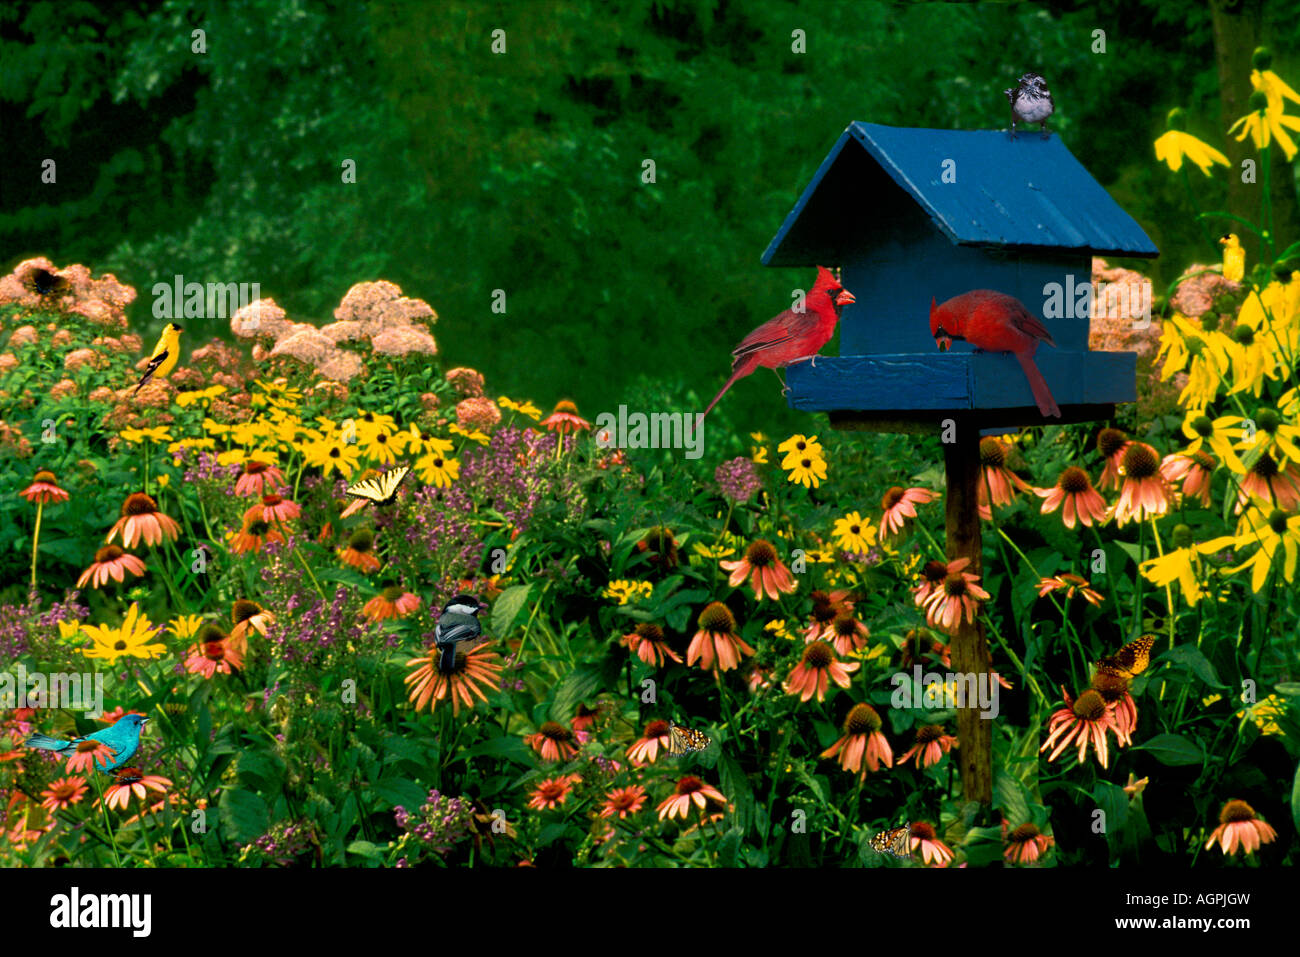 Dinnertime rush: Blue-painted bird feeder in a garden of native wildflowers with a variety of songbirds eating seeds Stock Photo